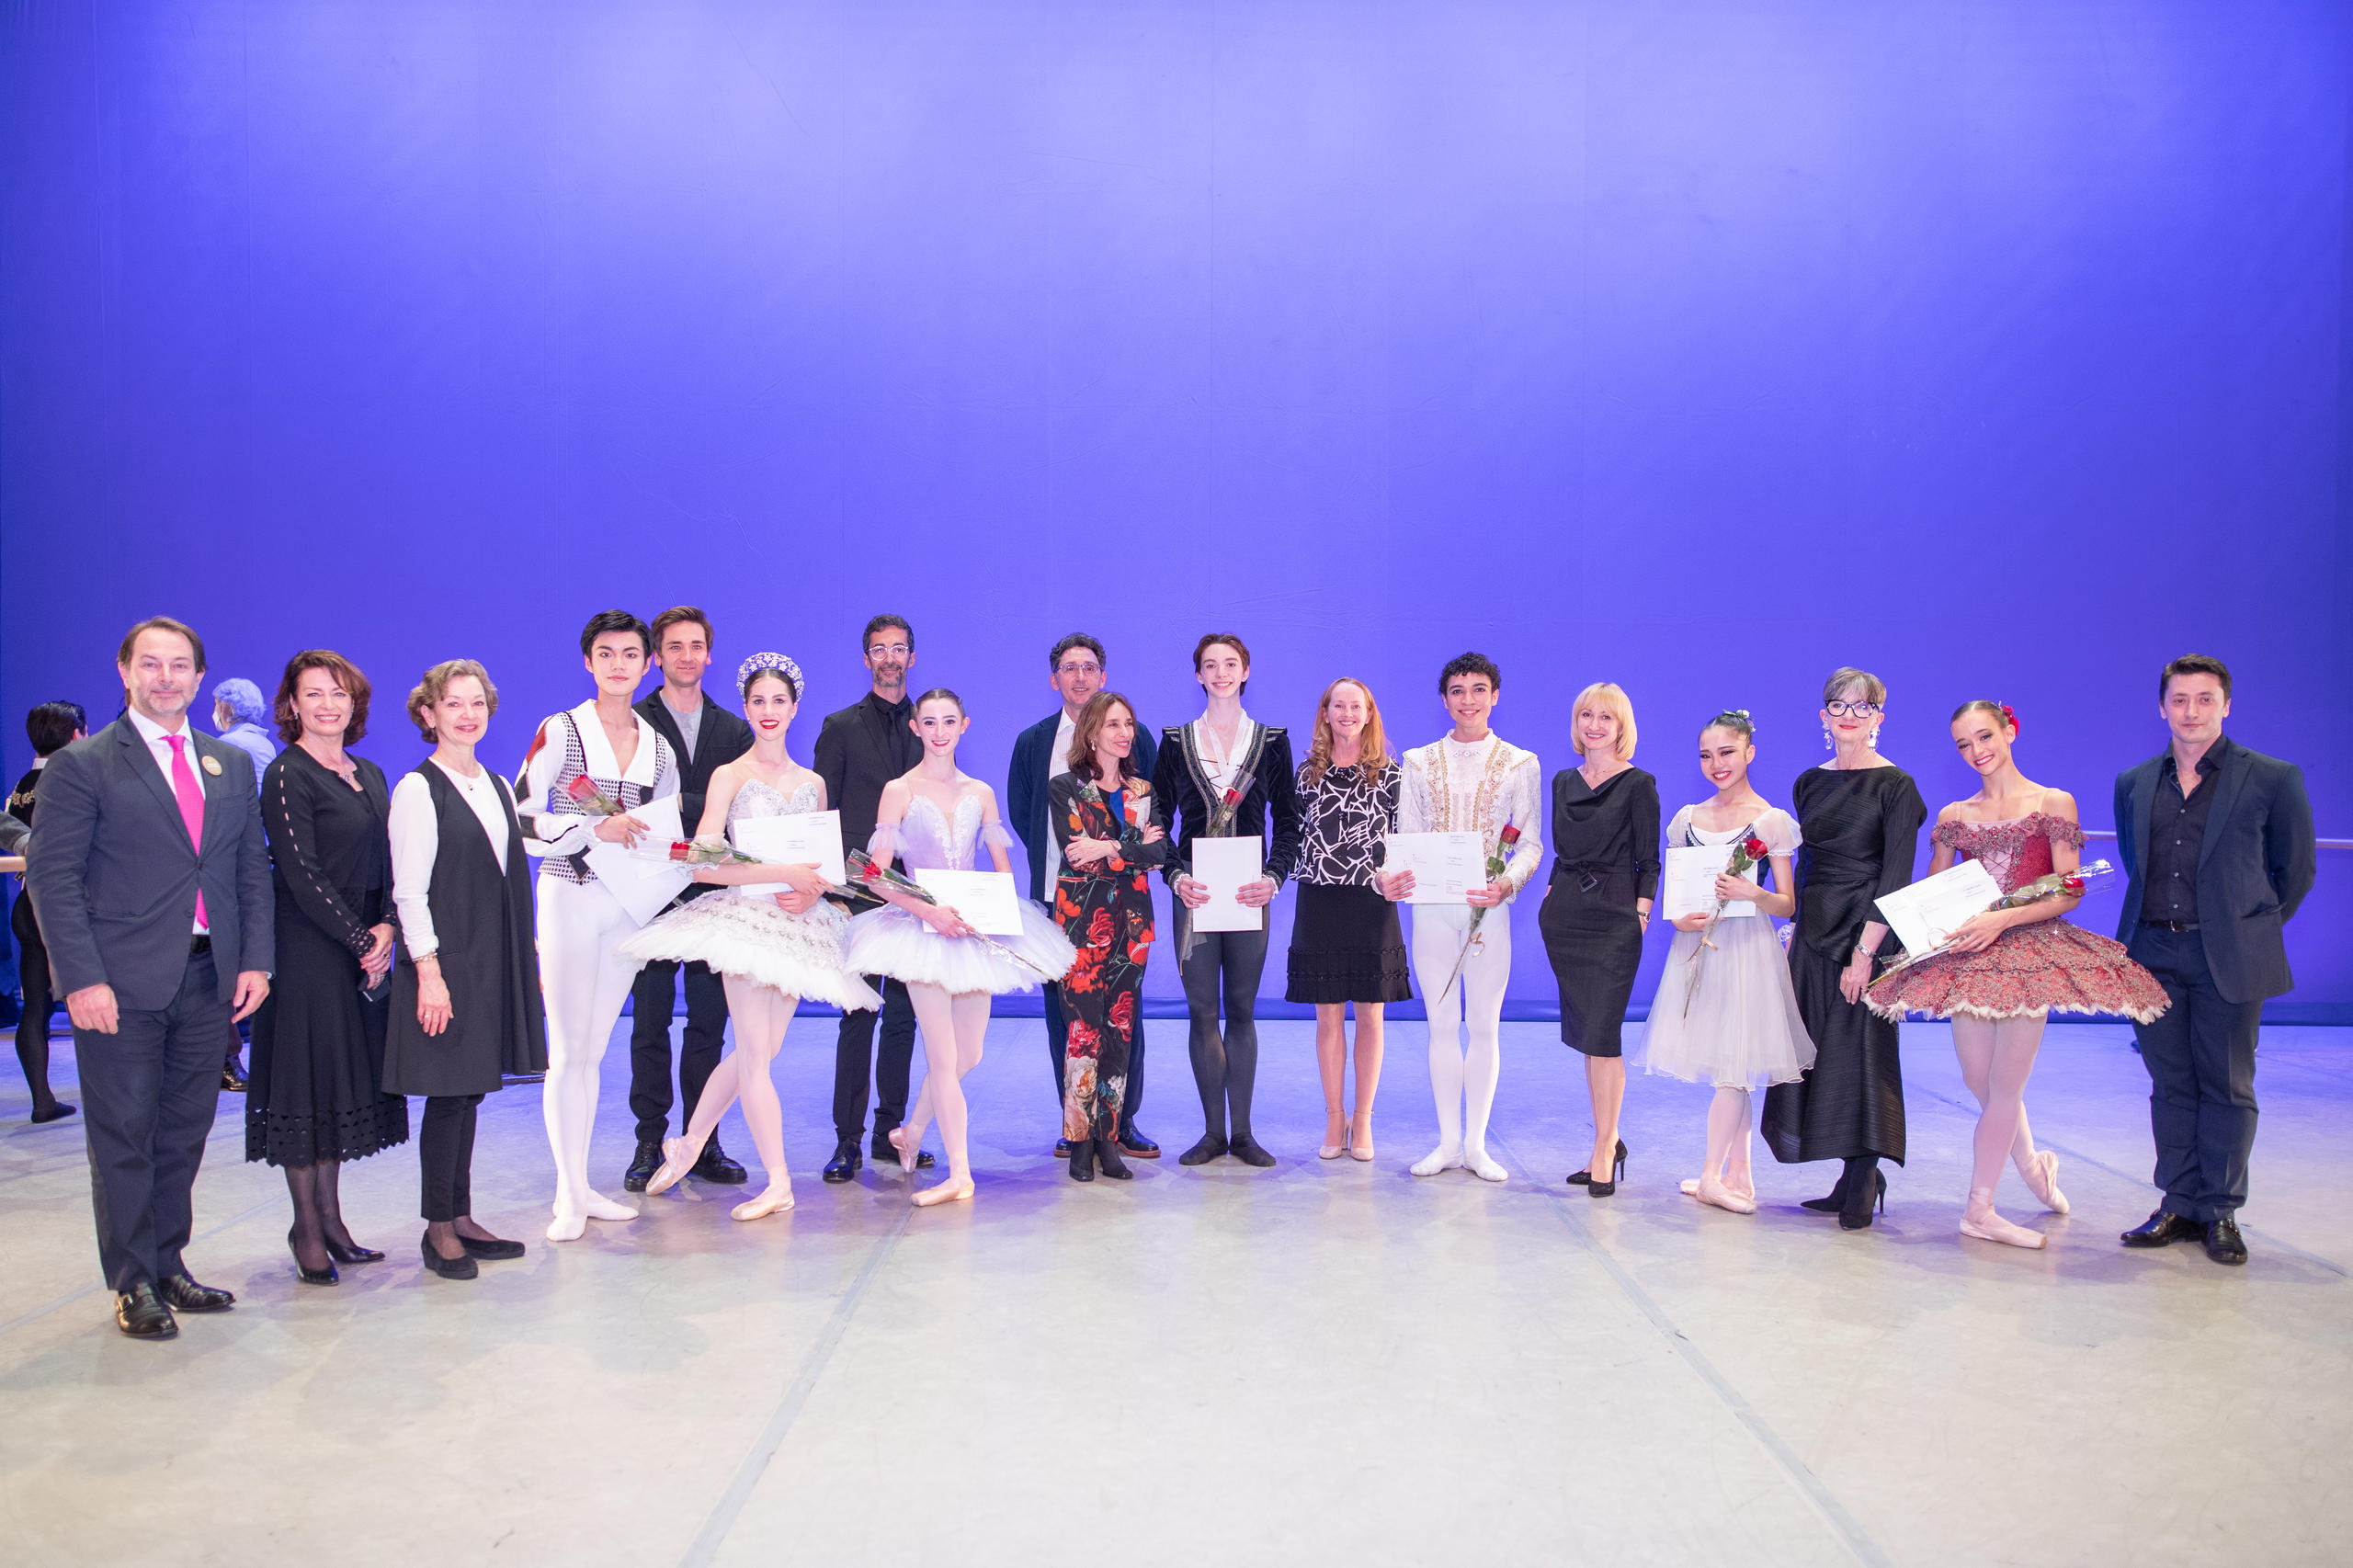 Winners and jury members of ballet competition posing for photographer